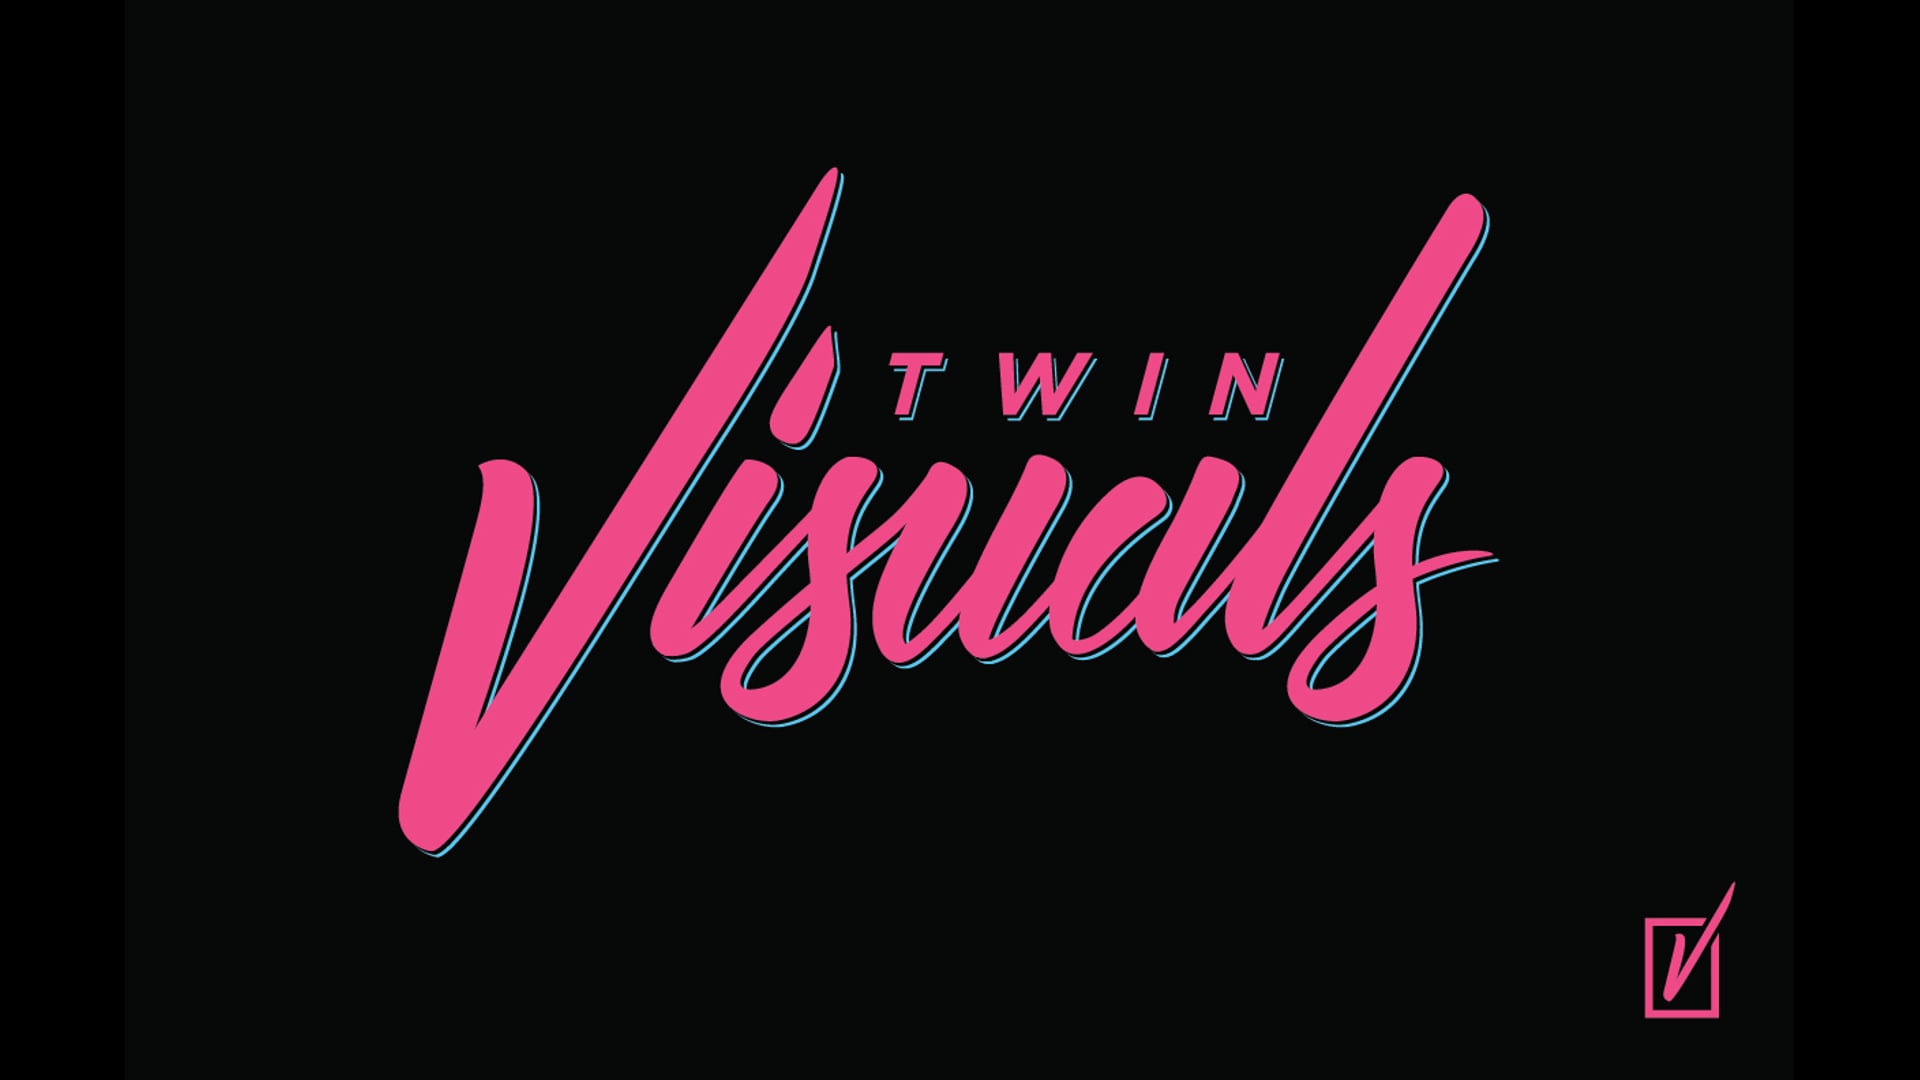 Promotional video thumbnail 1 for Twin Visuals LLC